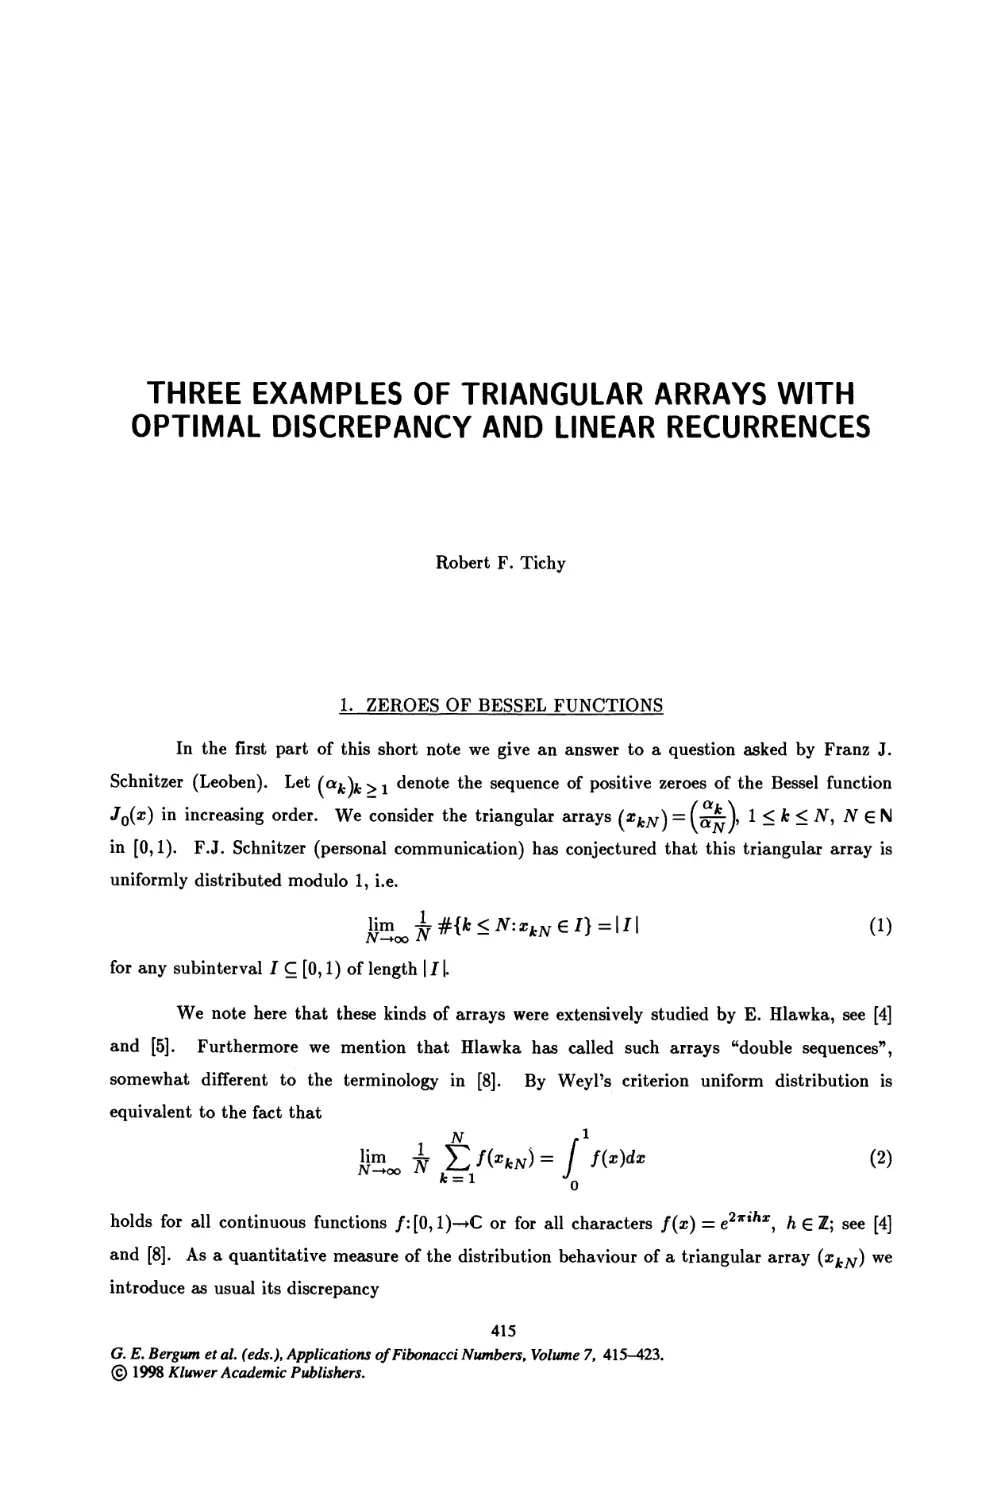 46. Three Examples of Triangular Arrays with Optimal Discrepancy and Linear Recurrences